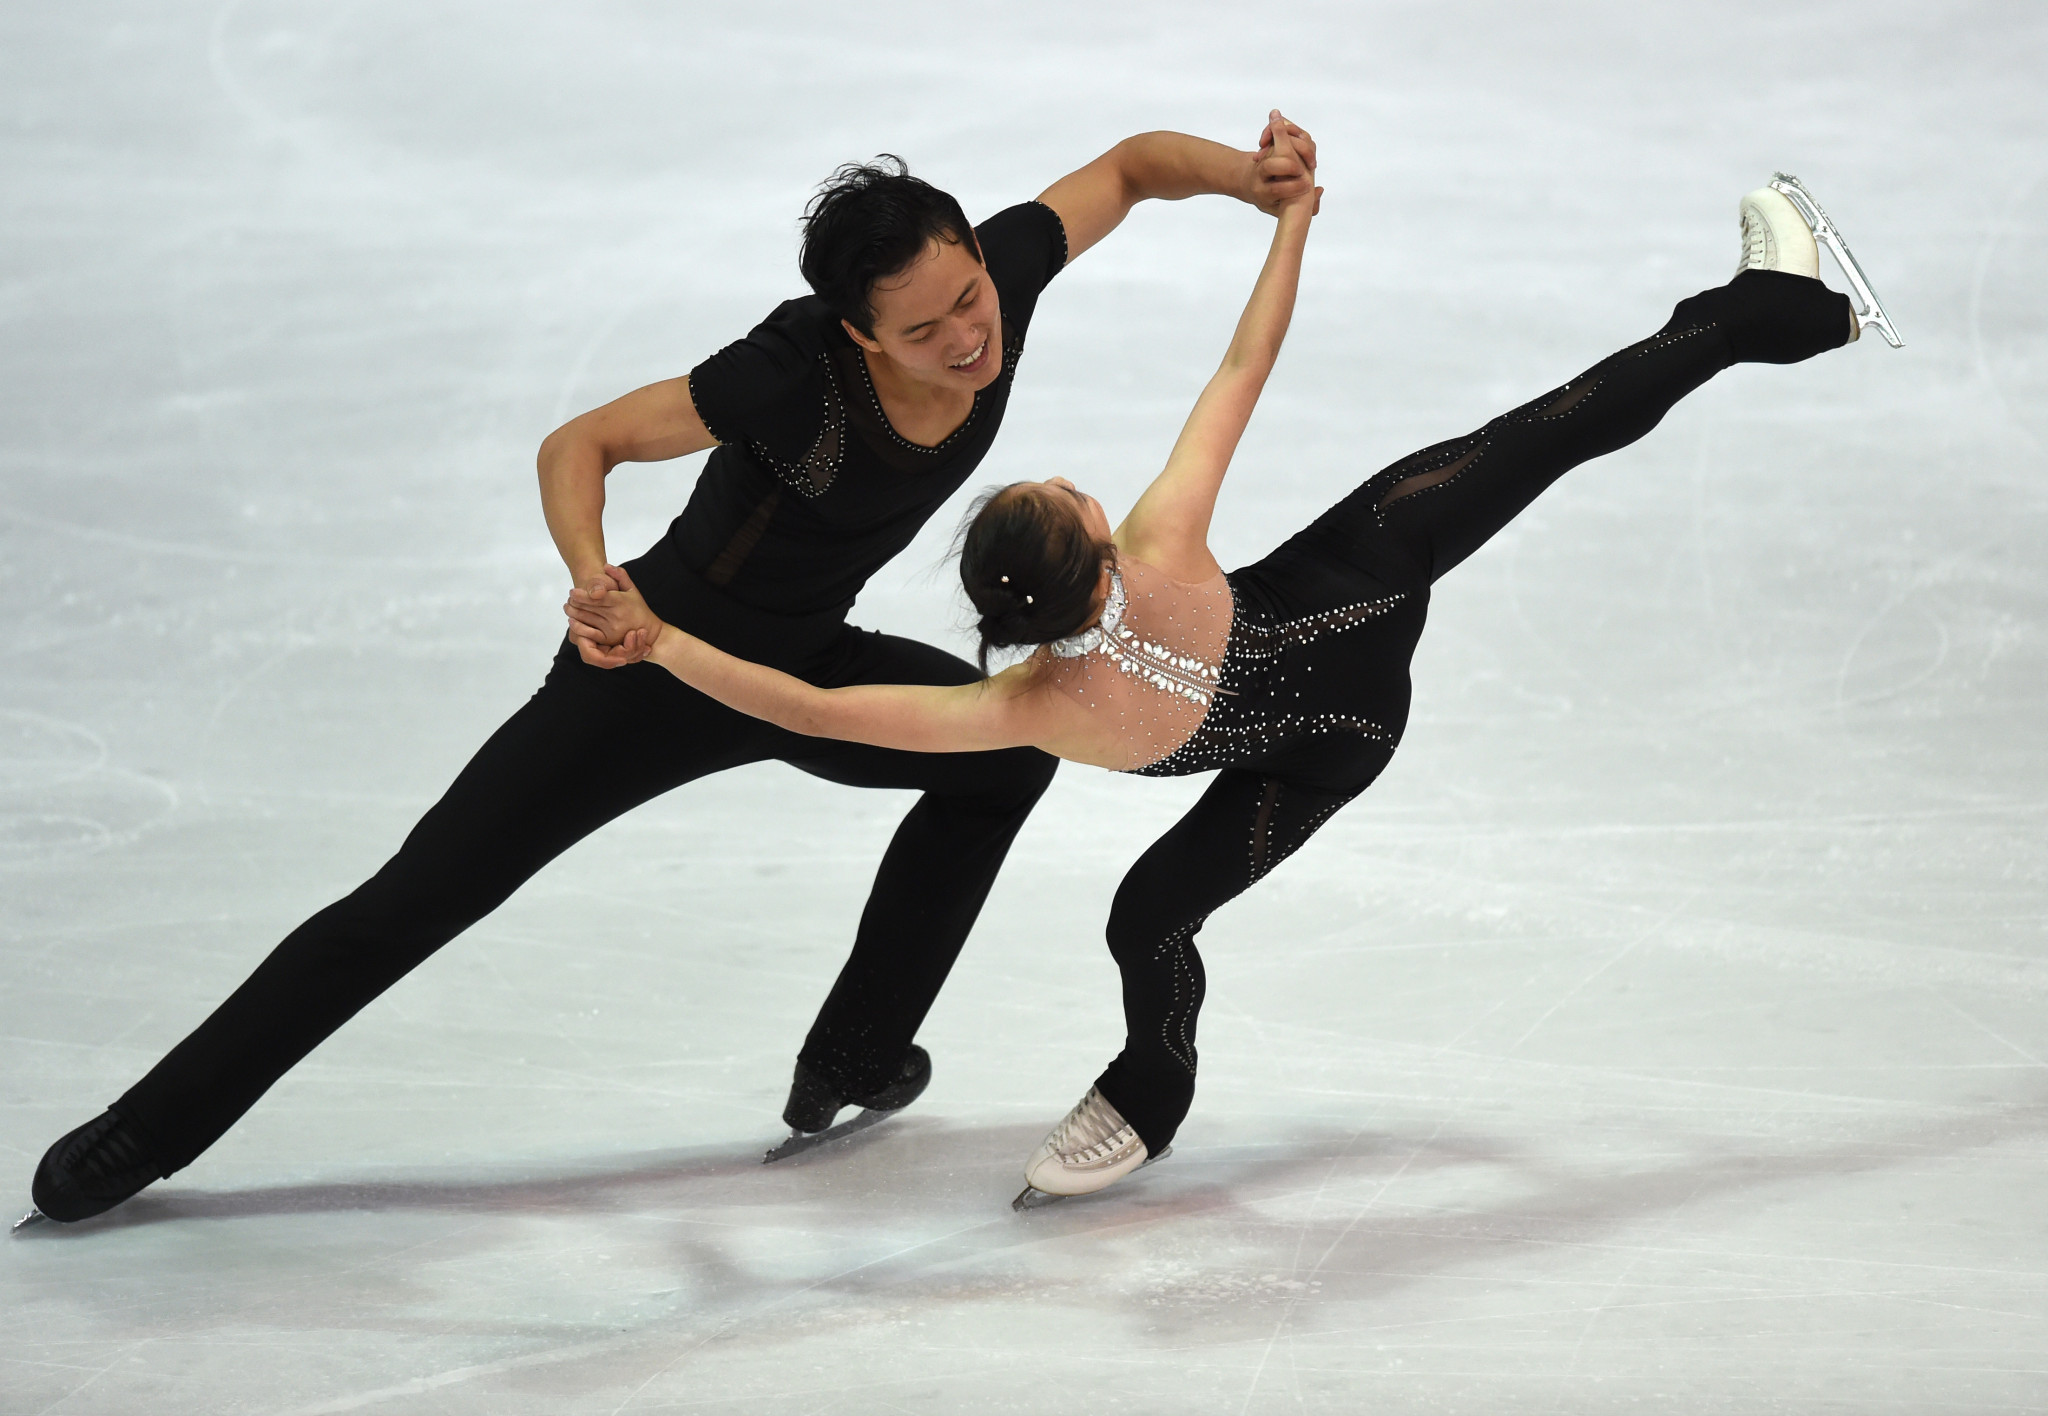 North Korea figure skaters Ryom Tae-Ok and Kim Ju-sik have qualified for Pyeongchang 2018 ©Getty Images